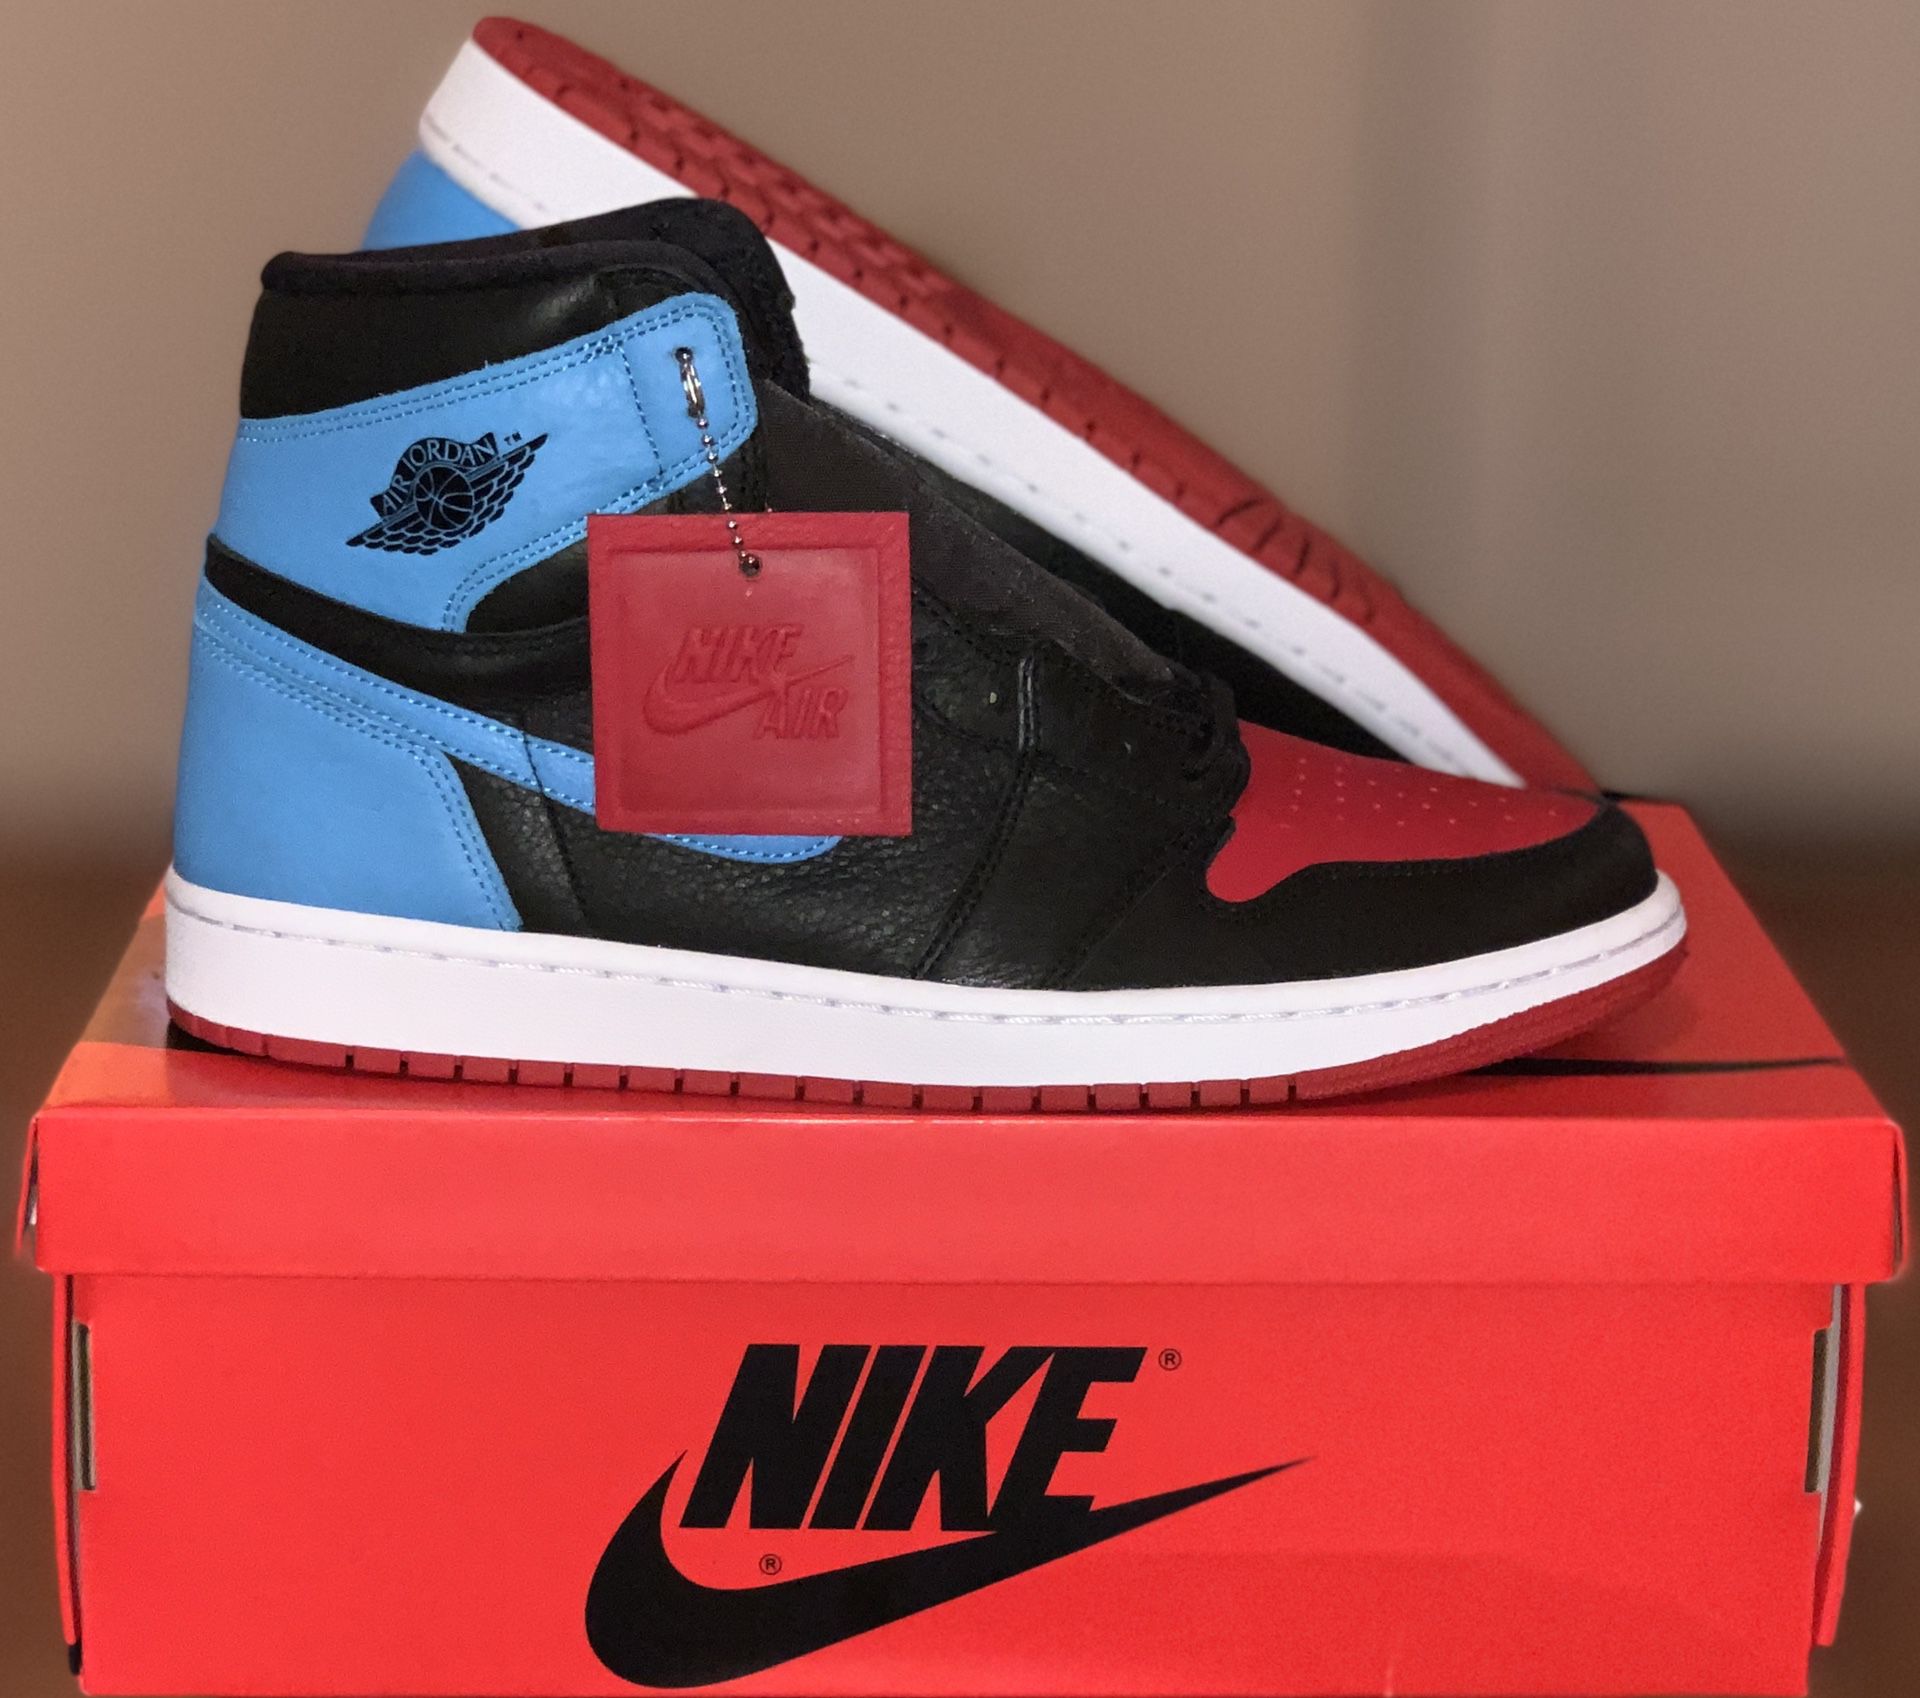 Air Jordan 1 UNC to CHI Size 12 (wmns) 10.5 (men’s) Brand New DS with receipt...